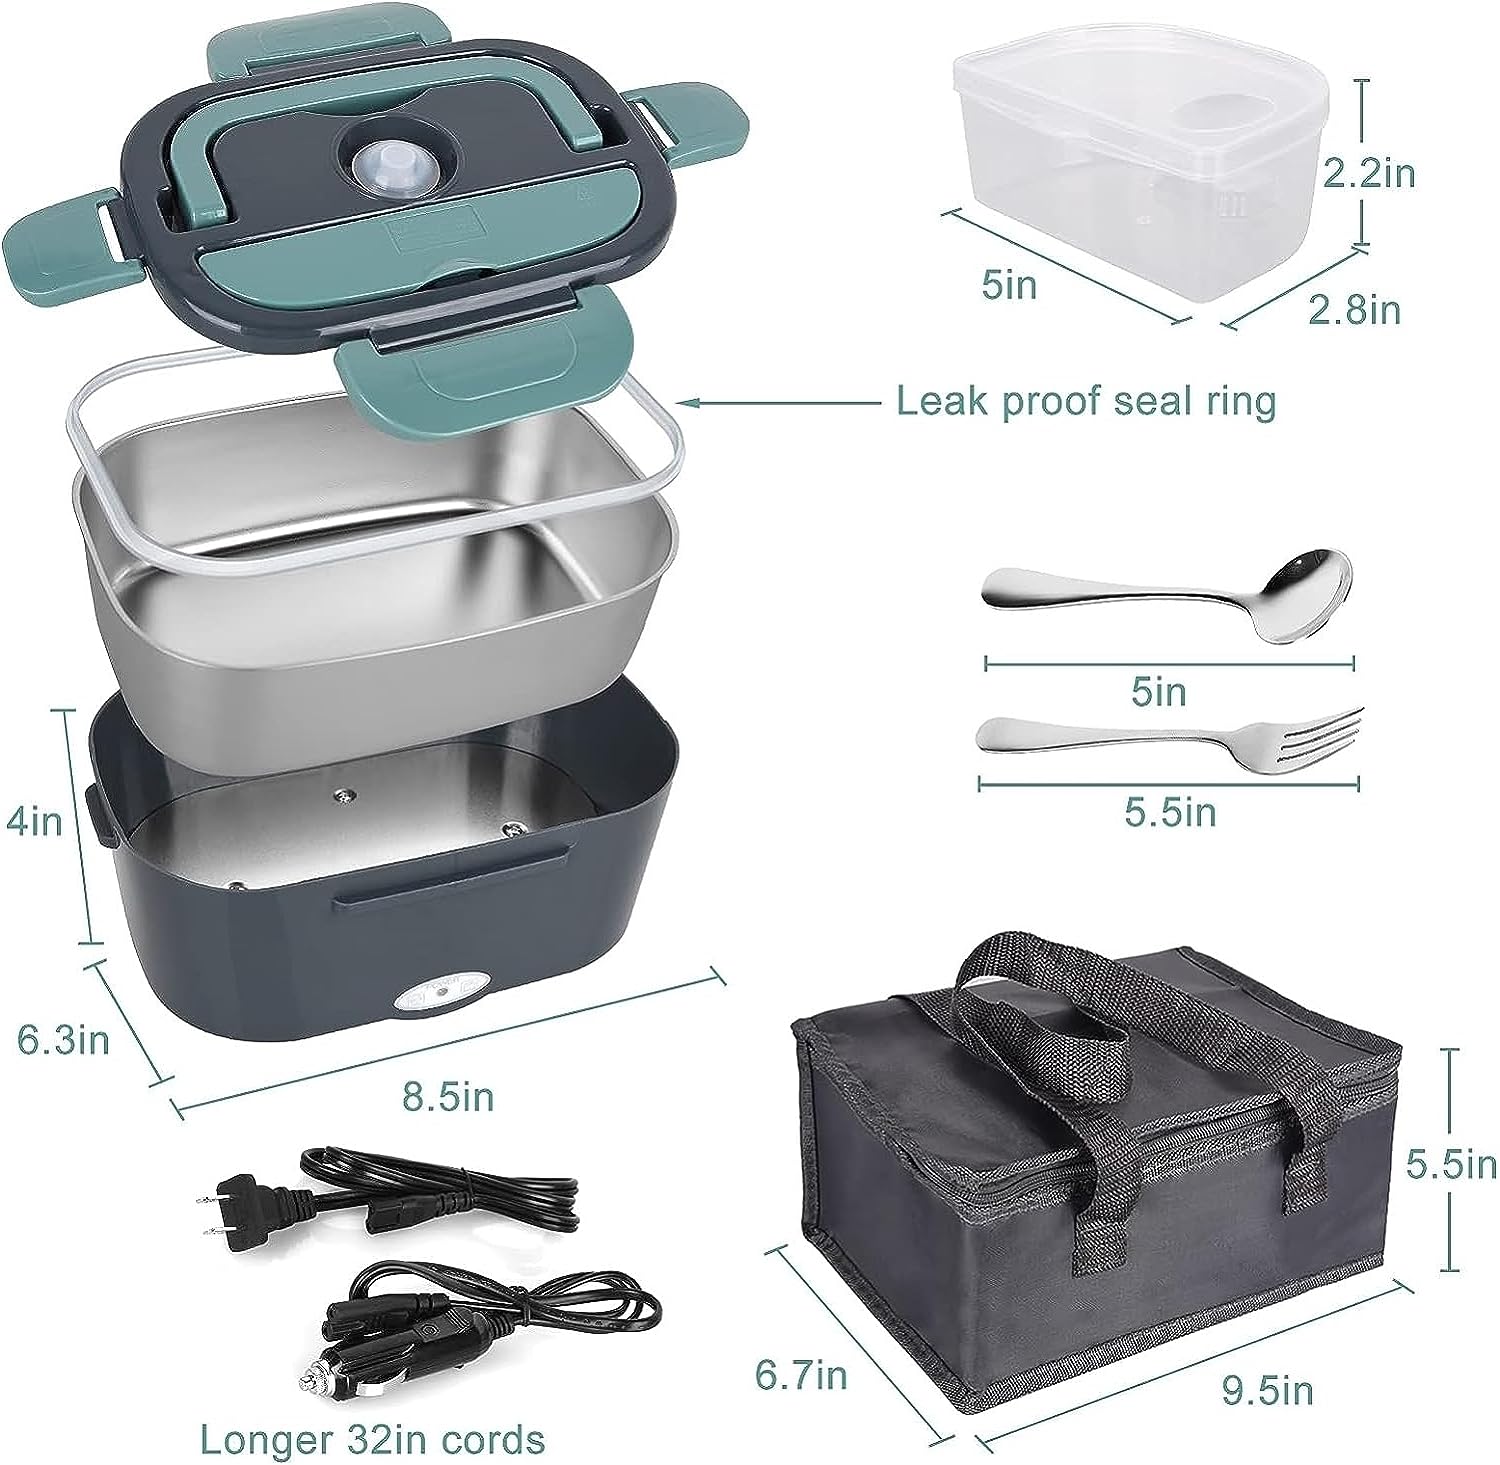 GOMINIMO 1.5L Electric Food Warmer Lunch Box with Insulated Carrying Bag